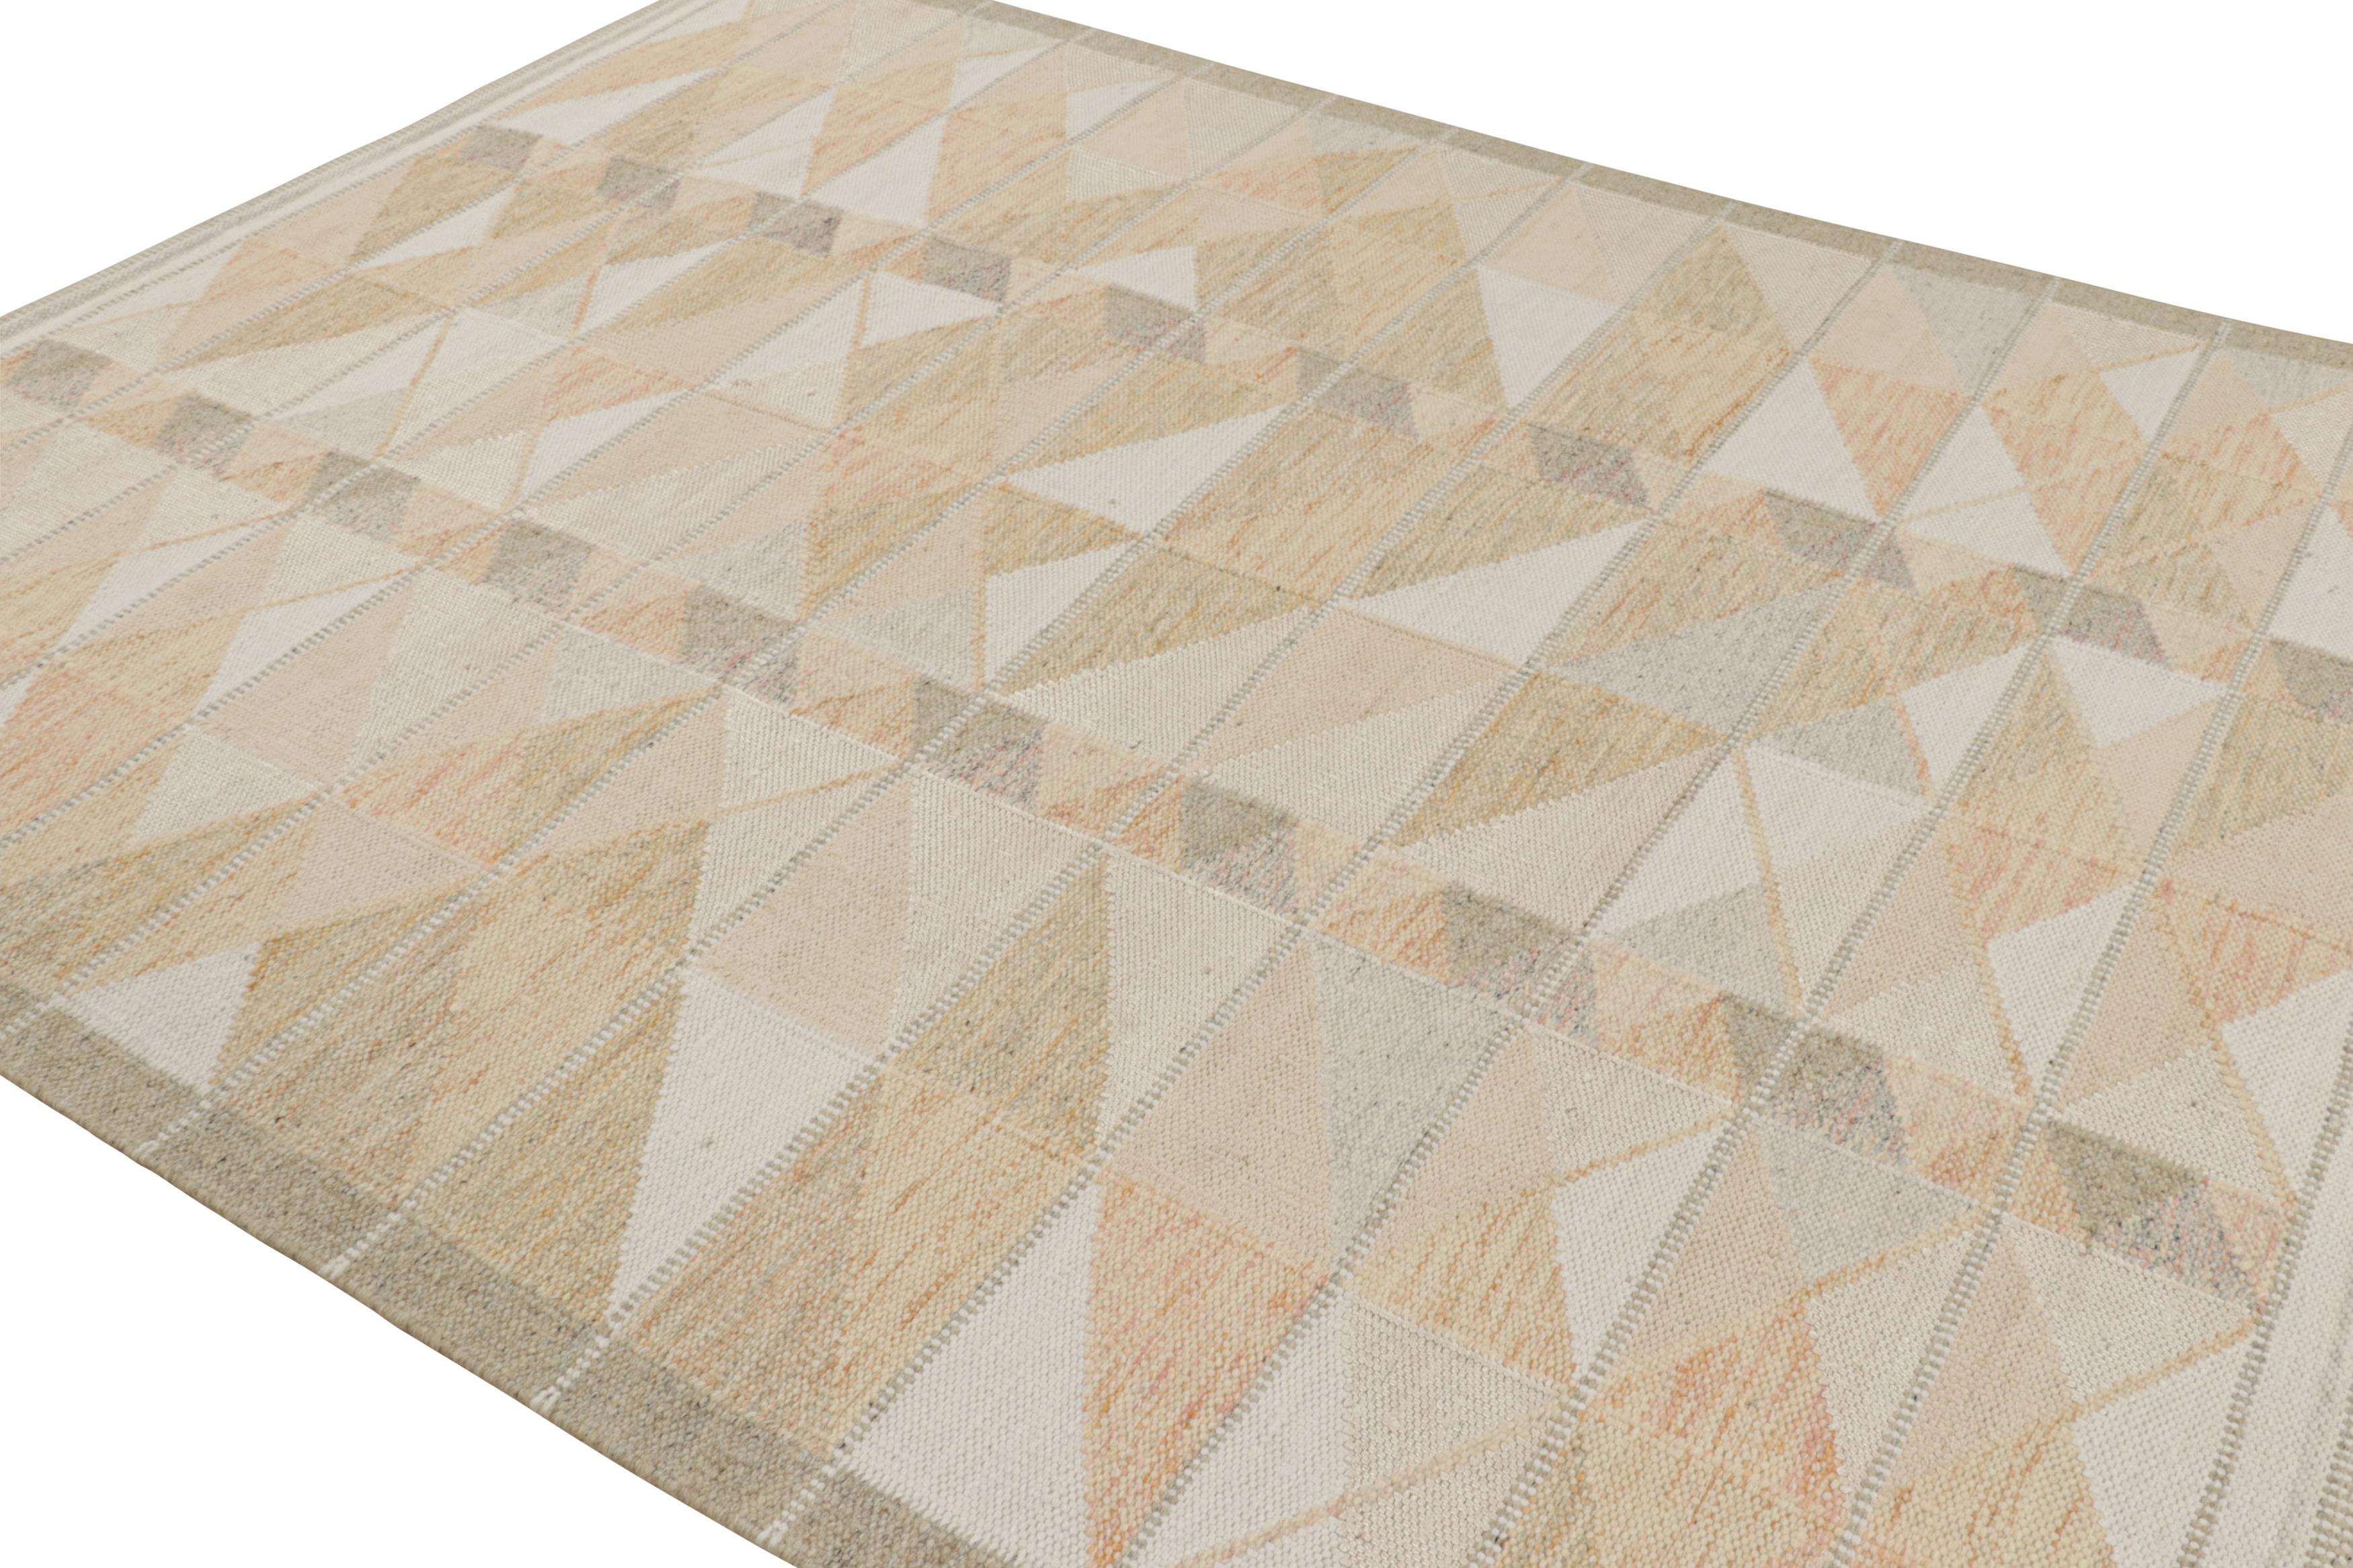 Indian Rug & Kilim’s Scandinavian Style Rug in Beige, Gray and White Geometric Patterns For Sale